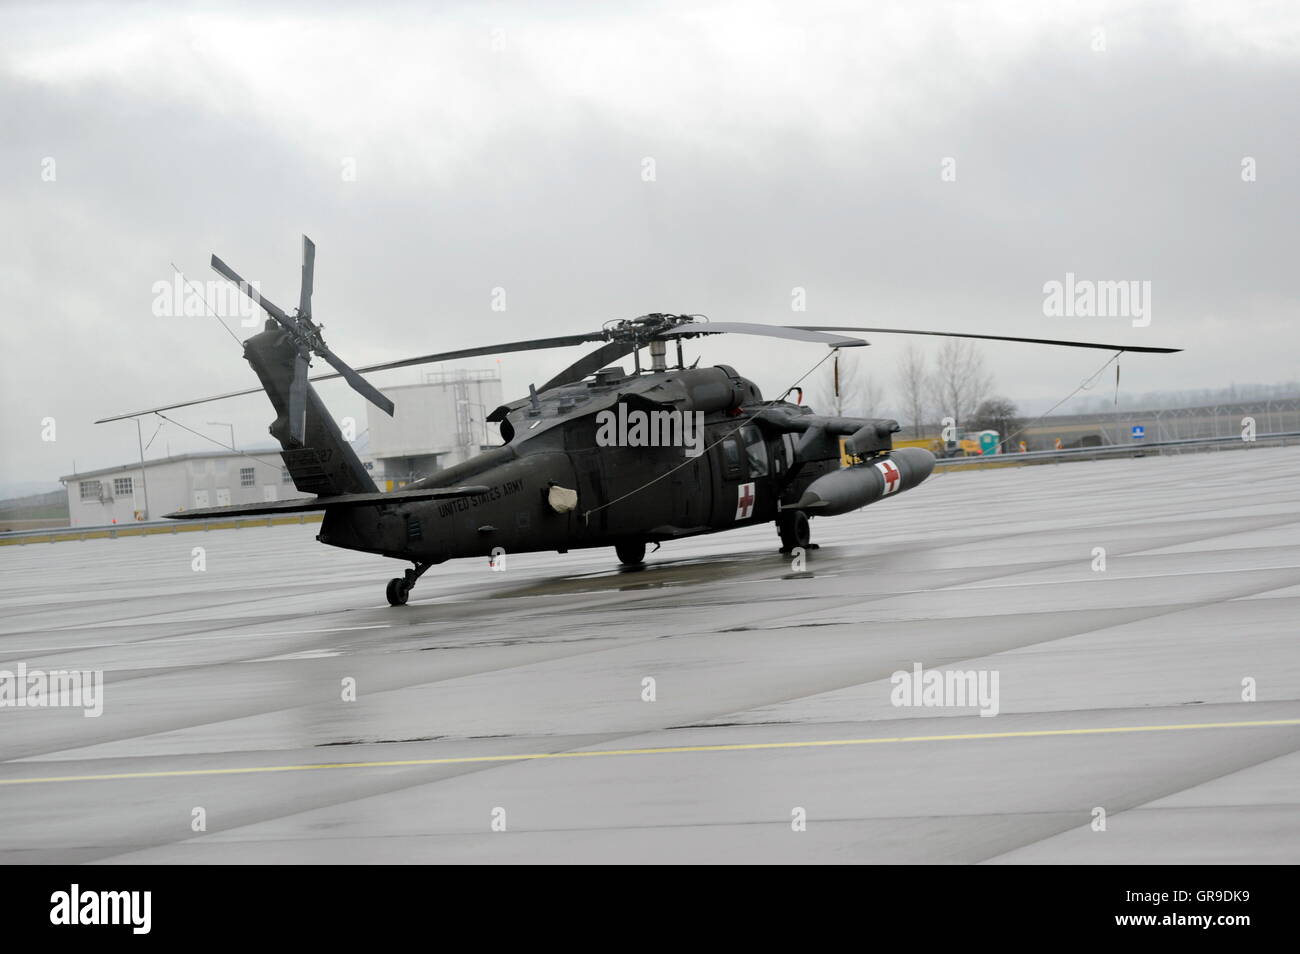 United States Army, Blackhawk Transport Helicopter At Vienna International Airport Stock Photo